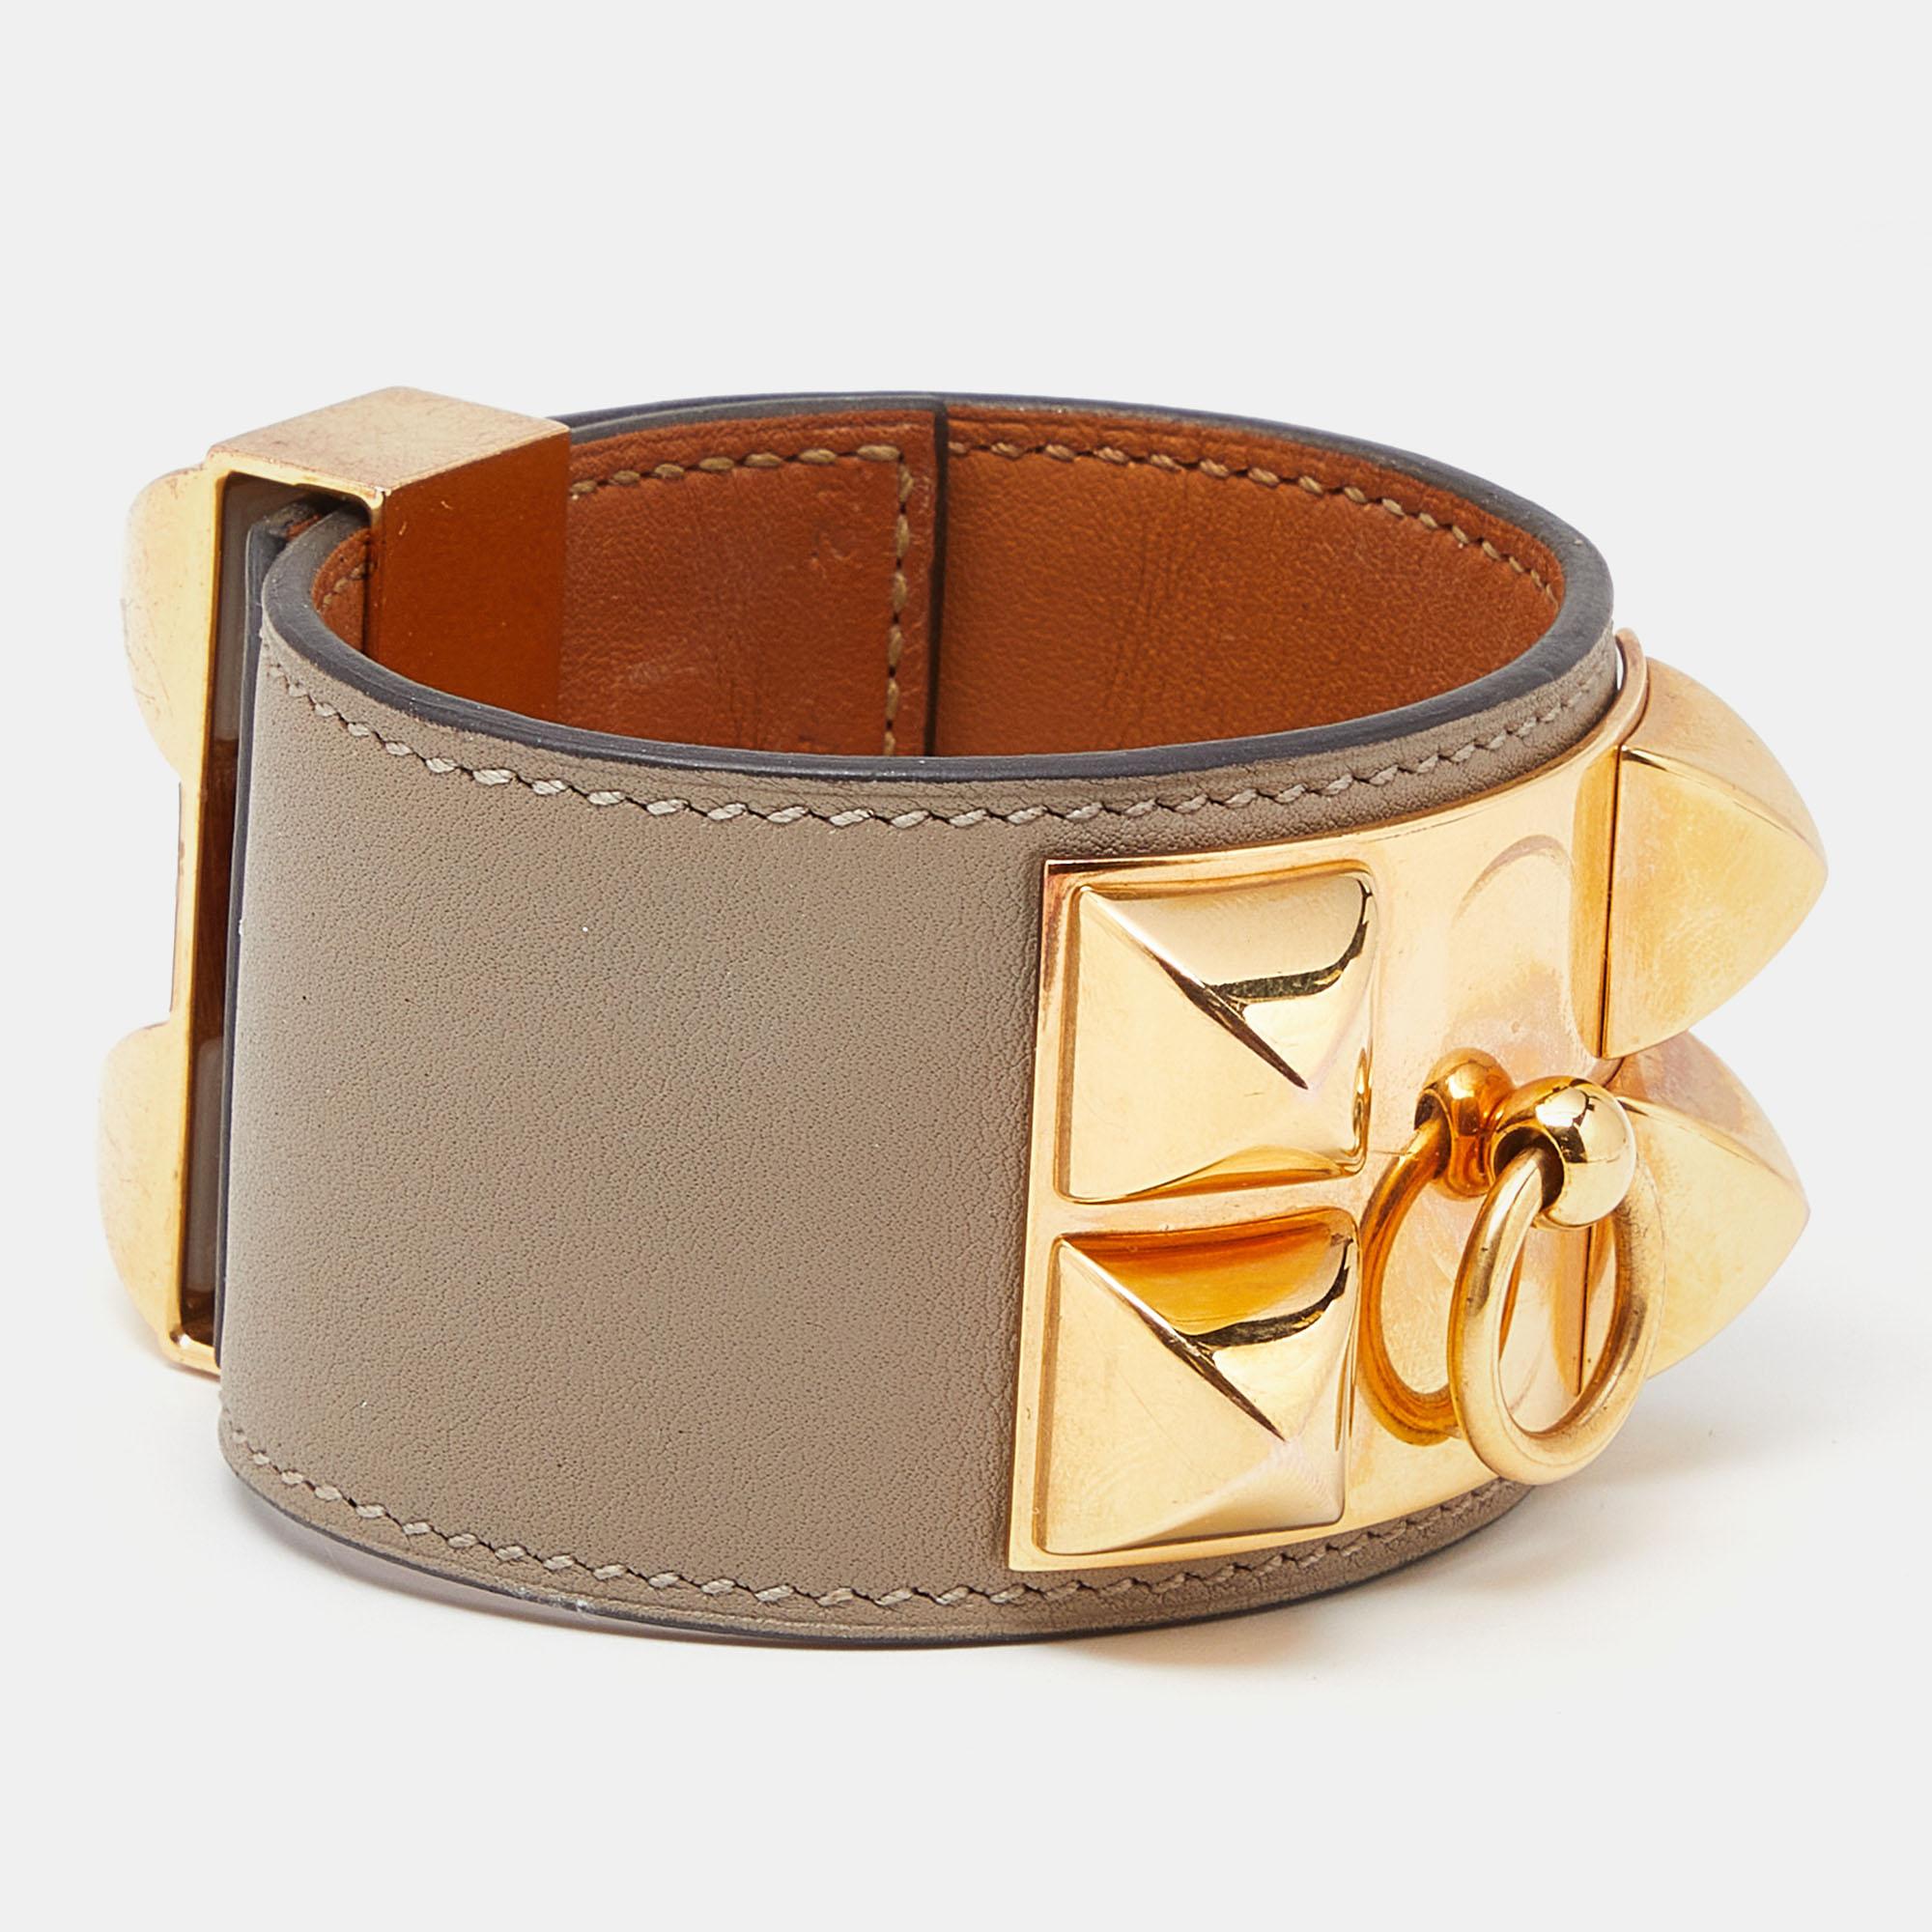 Add Hermes' magic to the way you accessorize with this bracelet. This leather bracelet is styled with fine lines and gold-plated metal. Highlighted by signature details, it is sure to add luxury charm to your ensemble.

